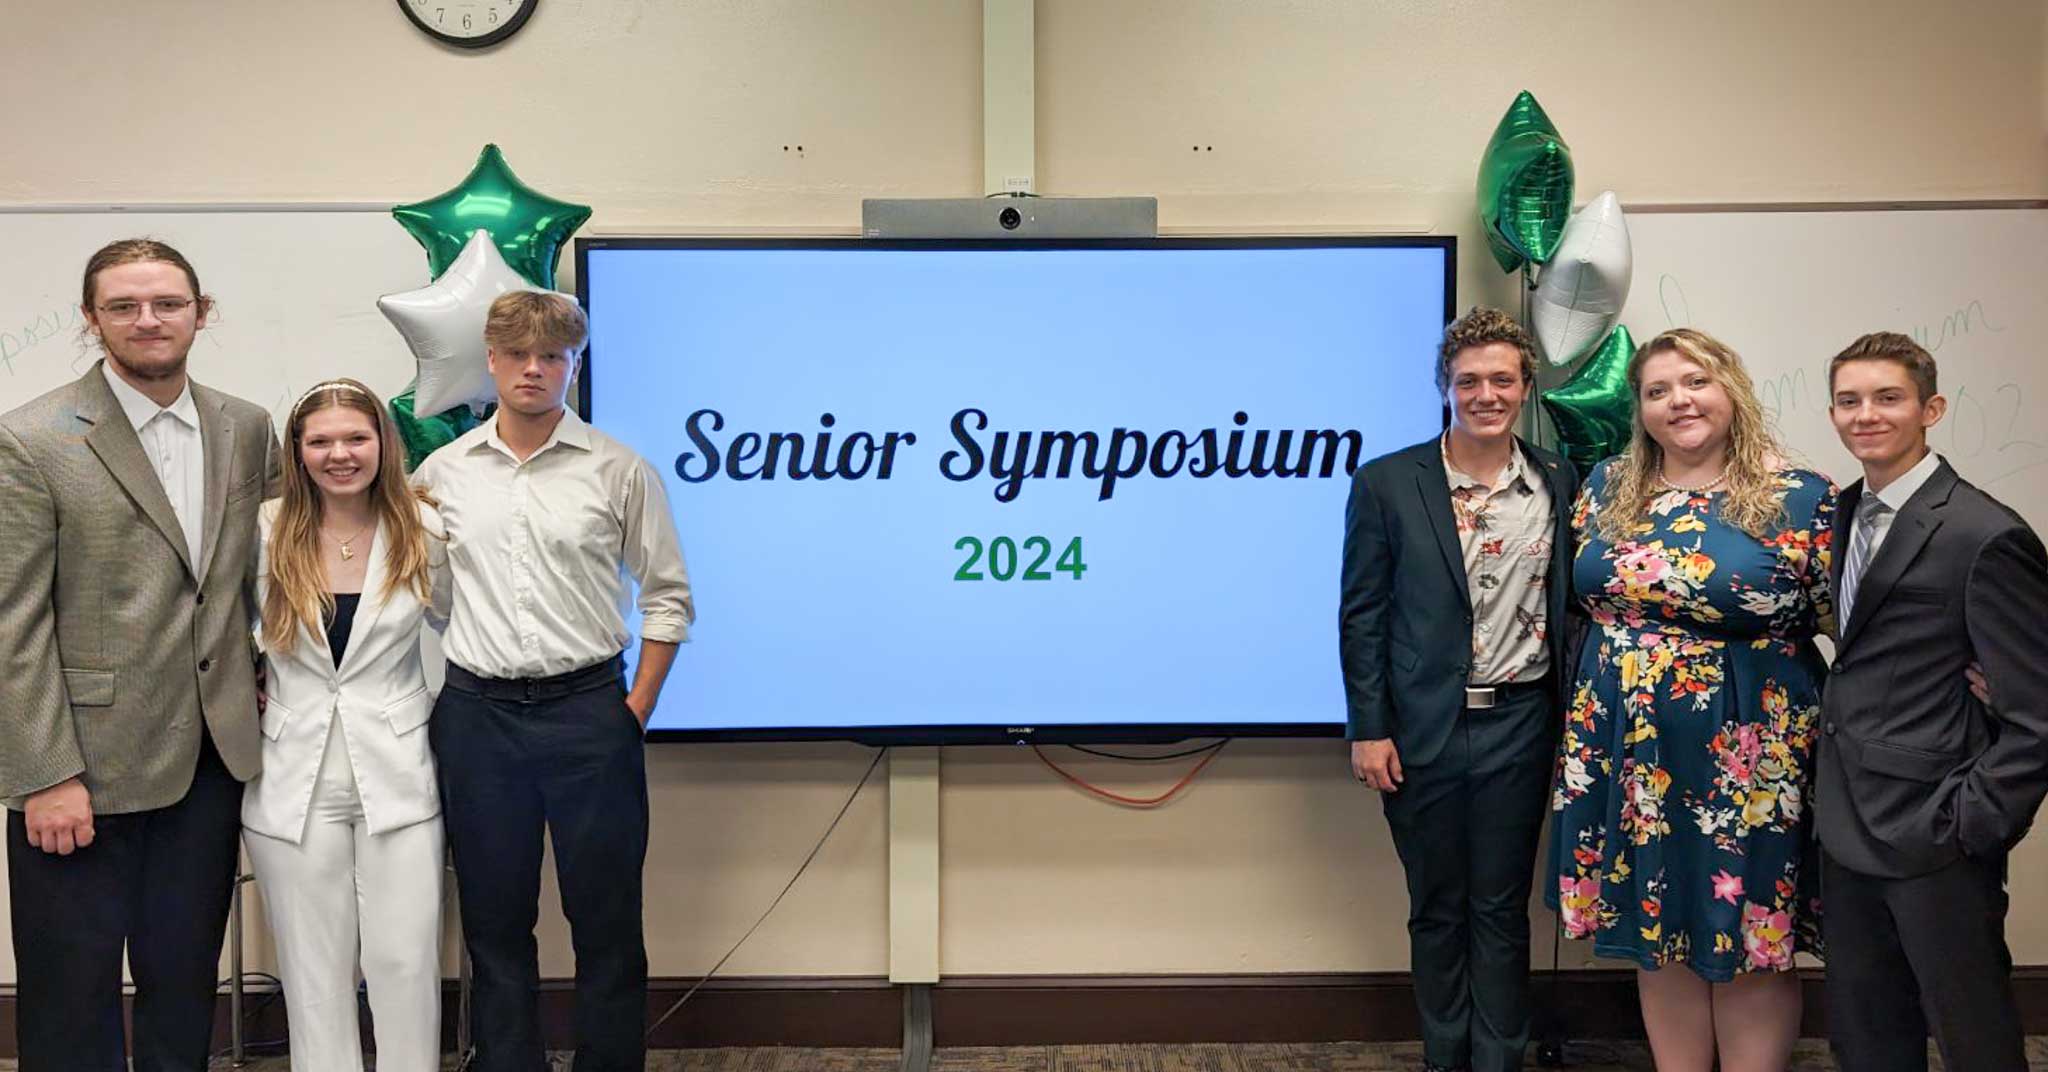 Five students, dressed in professional attire, stand with teacher. Monitor displays, Senior Symposium 2024, green and white balloons in the background.